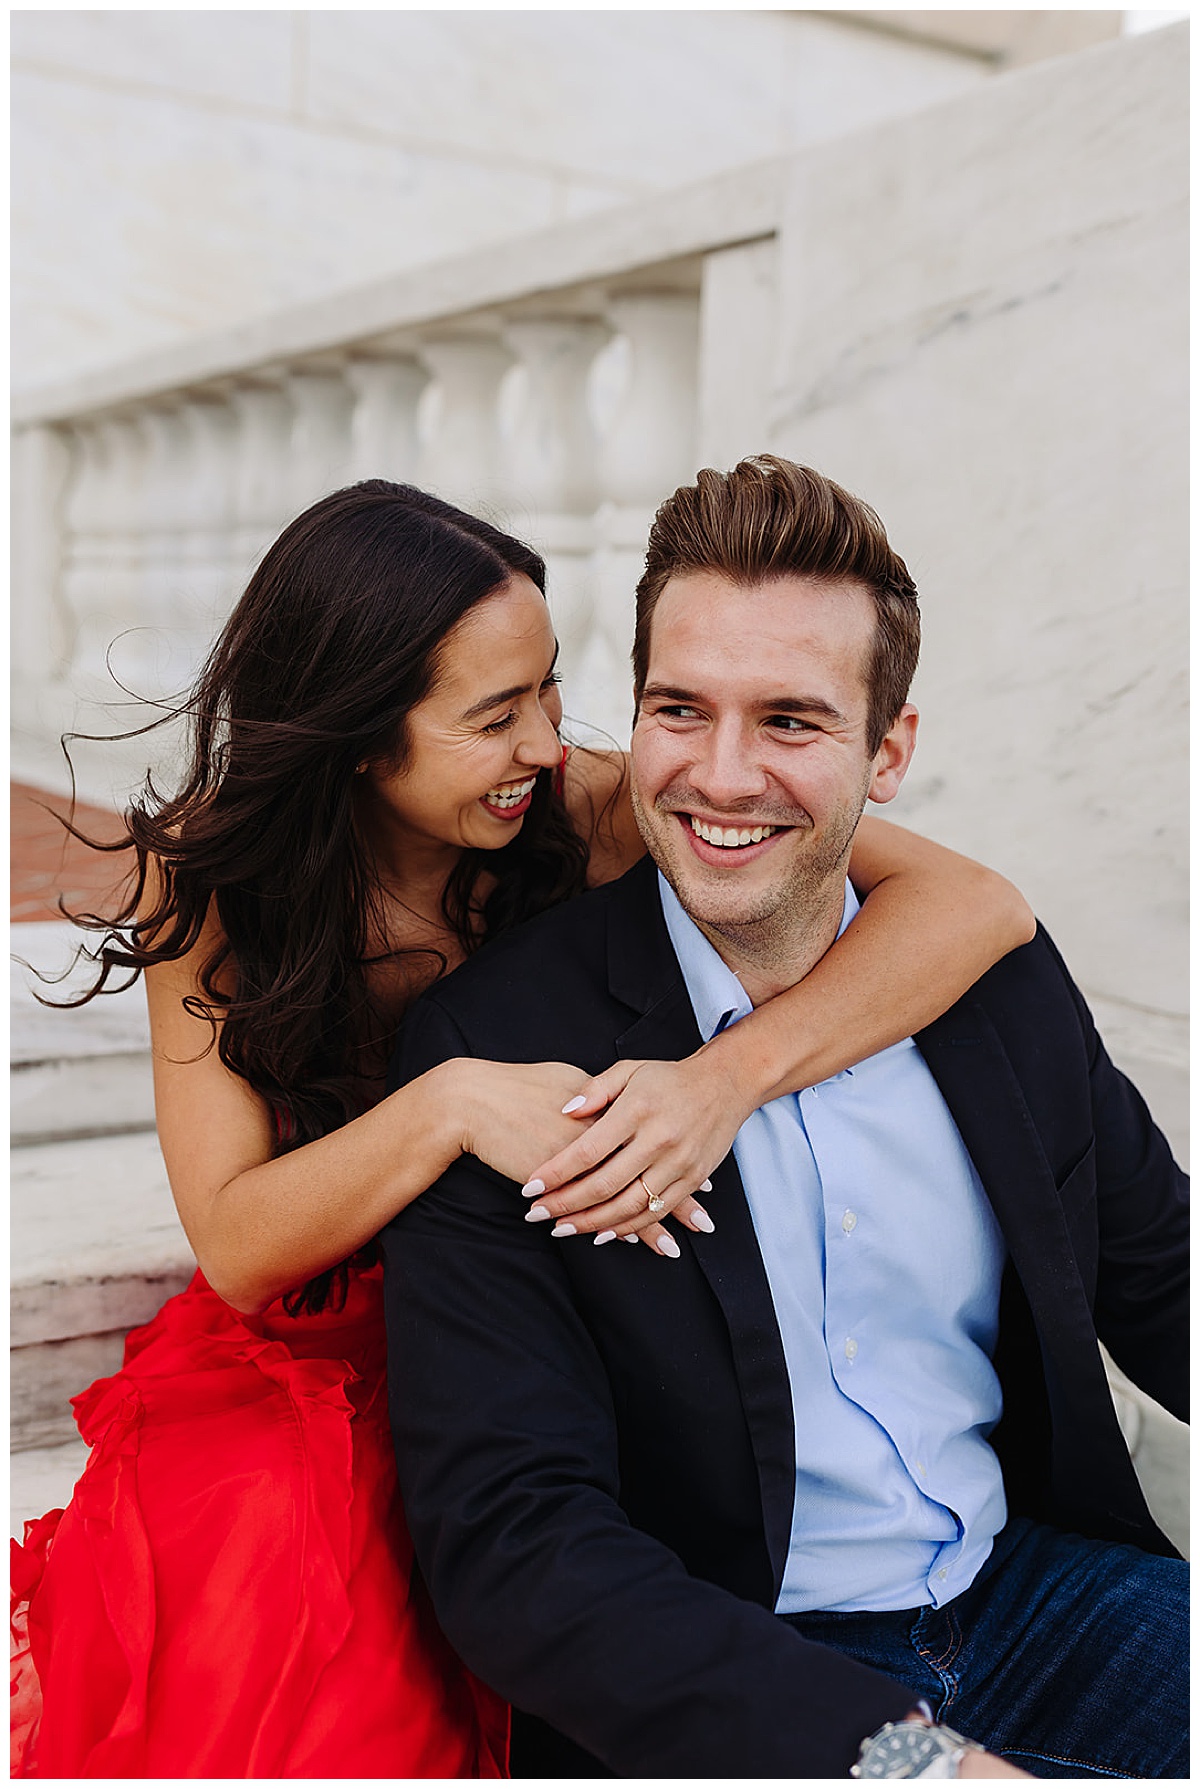 Future bride and groom laugh together on steps for Kayla Bouren Photography